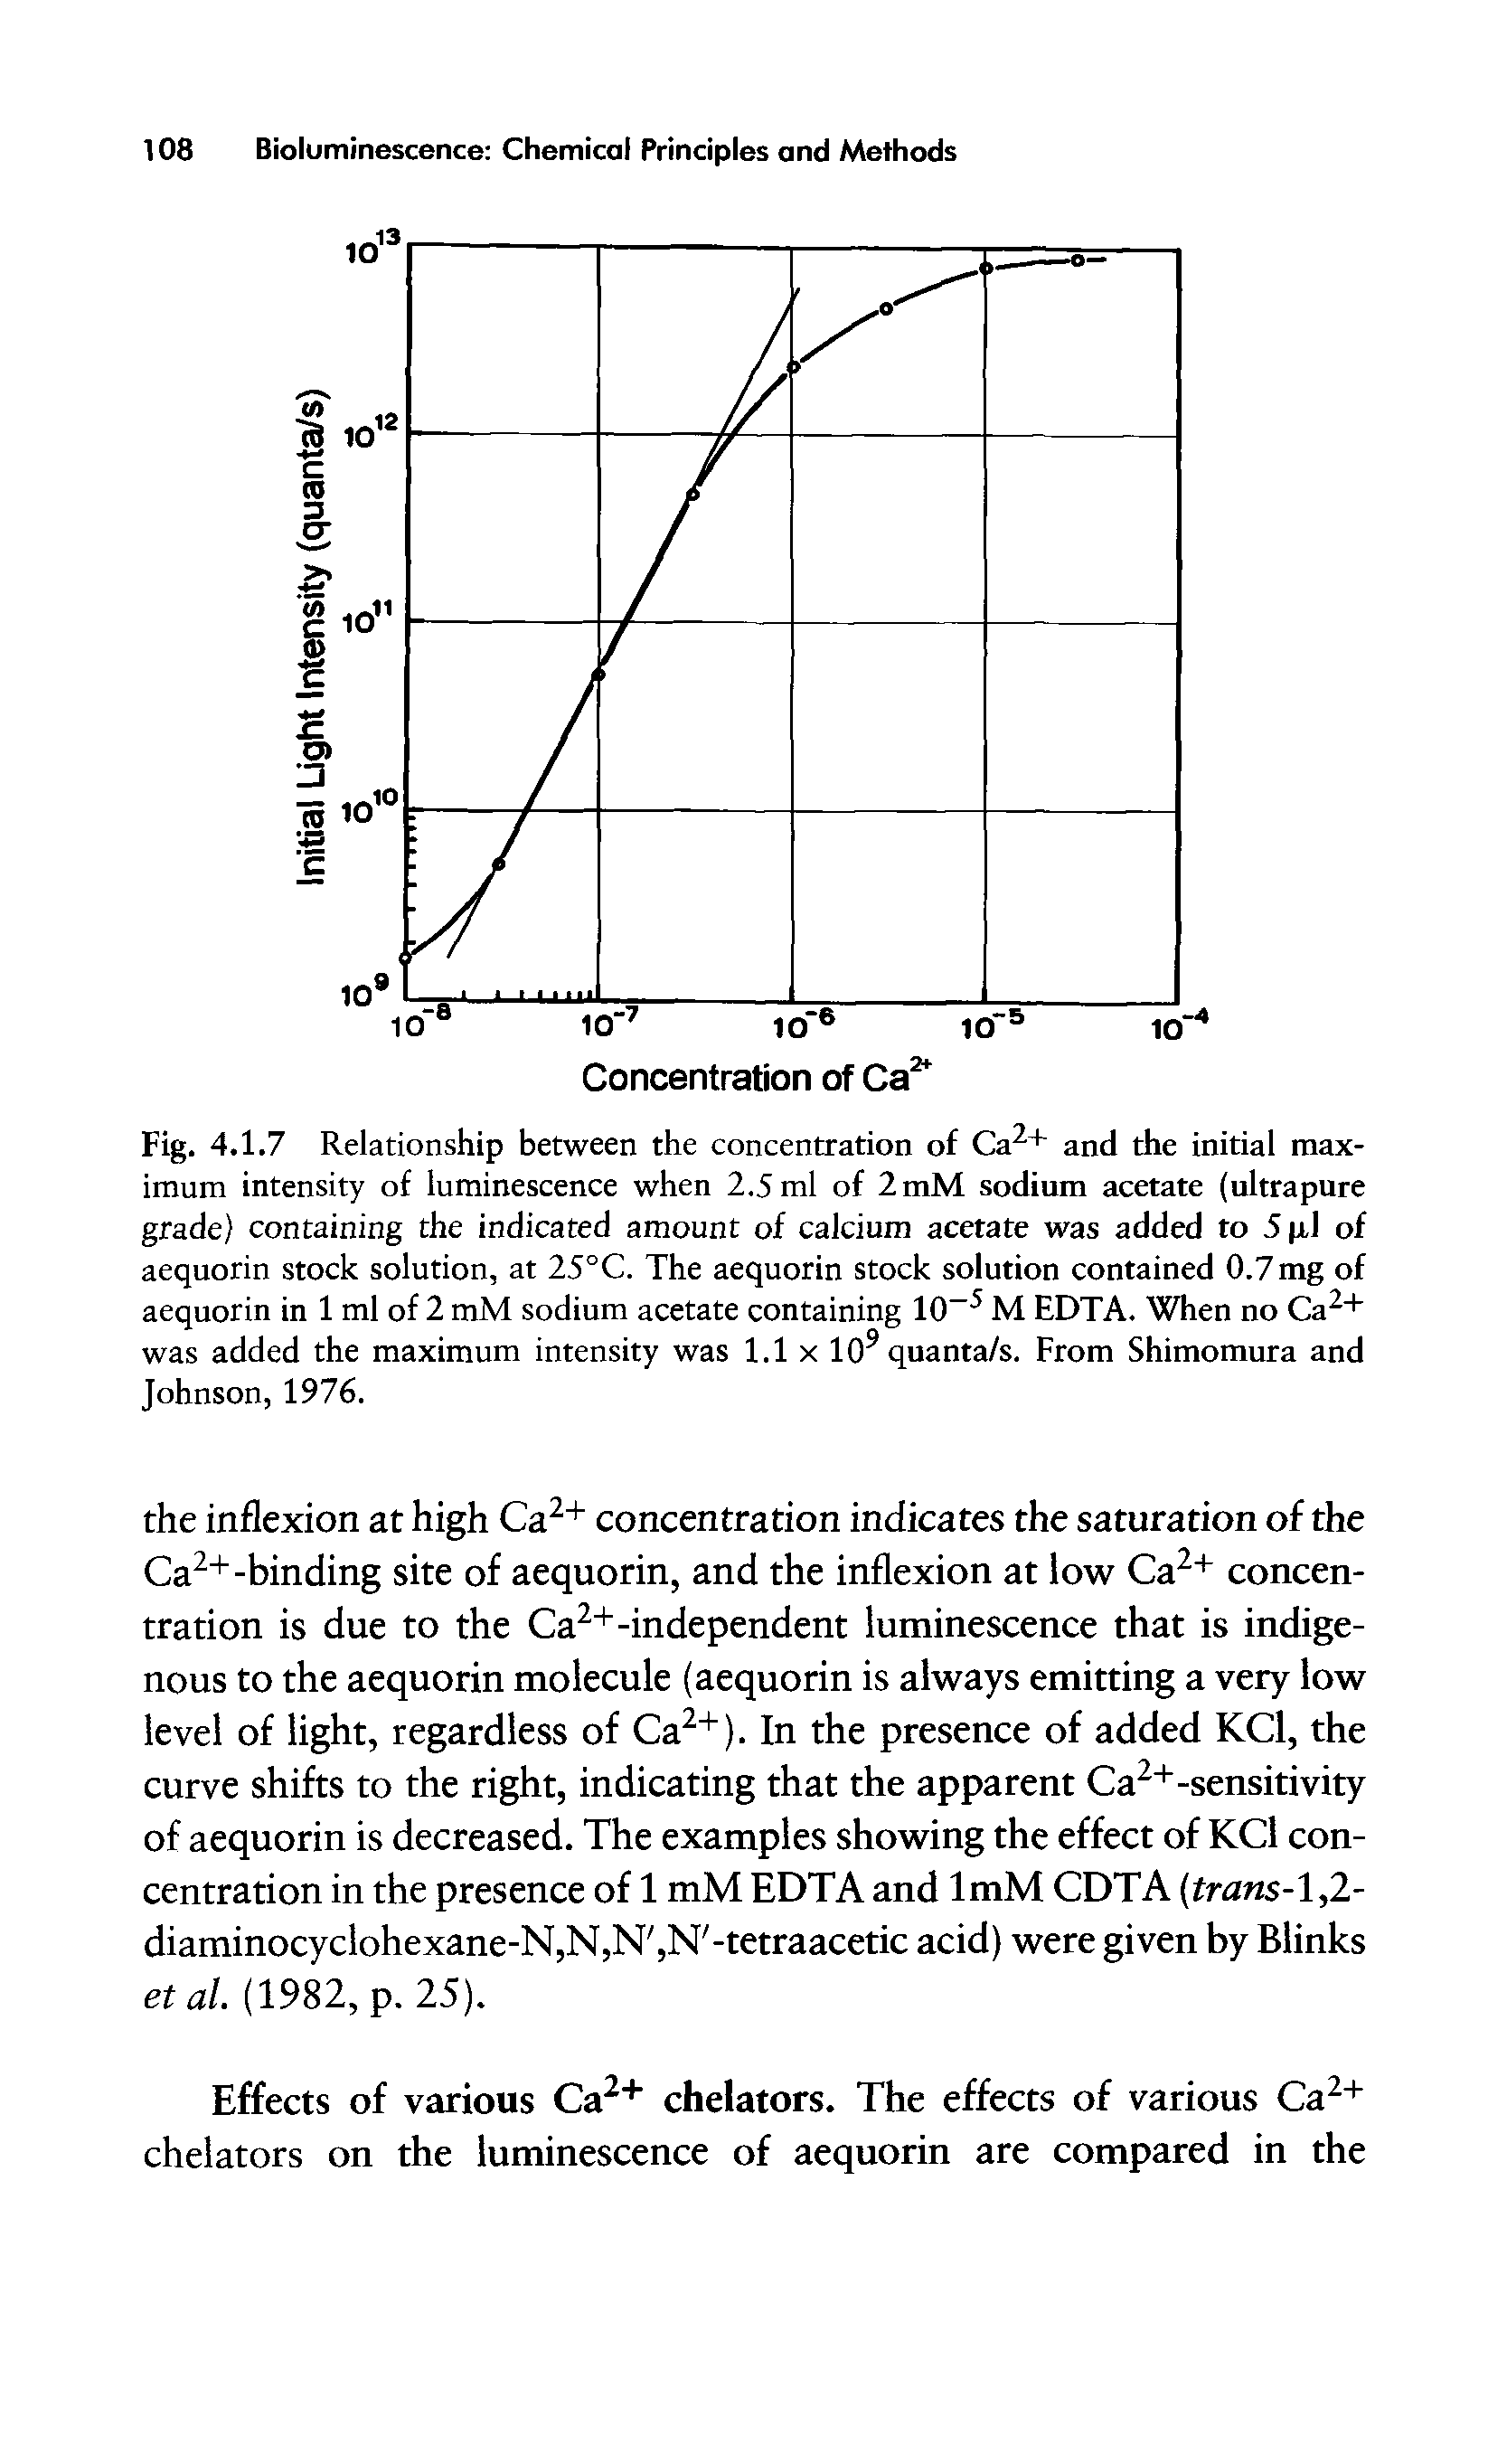 Fig. 4.1.7 Relationship between the concentration of Ca2+ and the initial maximum intensity of luminescence when 2.5 ml of 2mM sodium acetate (ultrapure grade) containing the indicated amount of calcium acetate was added to 5pJ of aequorin stock solution, at 25°C. The aequorin stock solution contained 0.7mg of aequorin in 1 ml of 2 mM sodium acetate containing 10-5 M EDTA. When no Ca2+ was added the maximum intensity was 1.1 x 109 quanta/s. From Shimomura and Johnson, 1976.